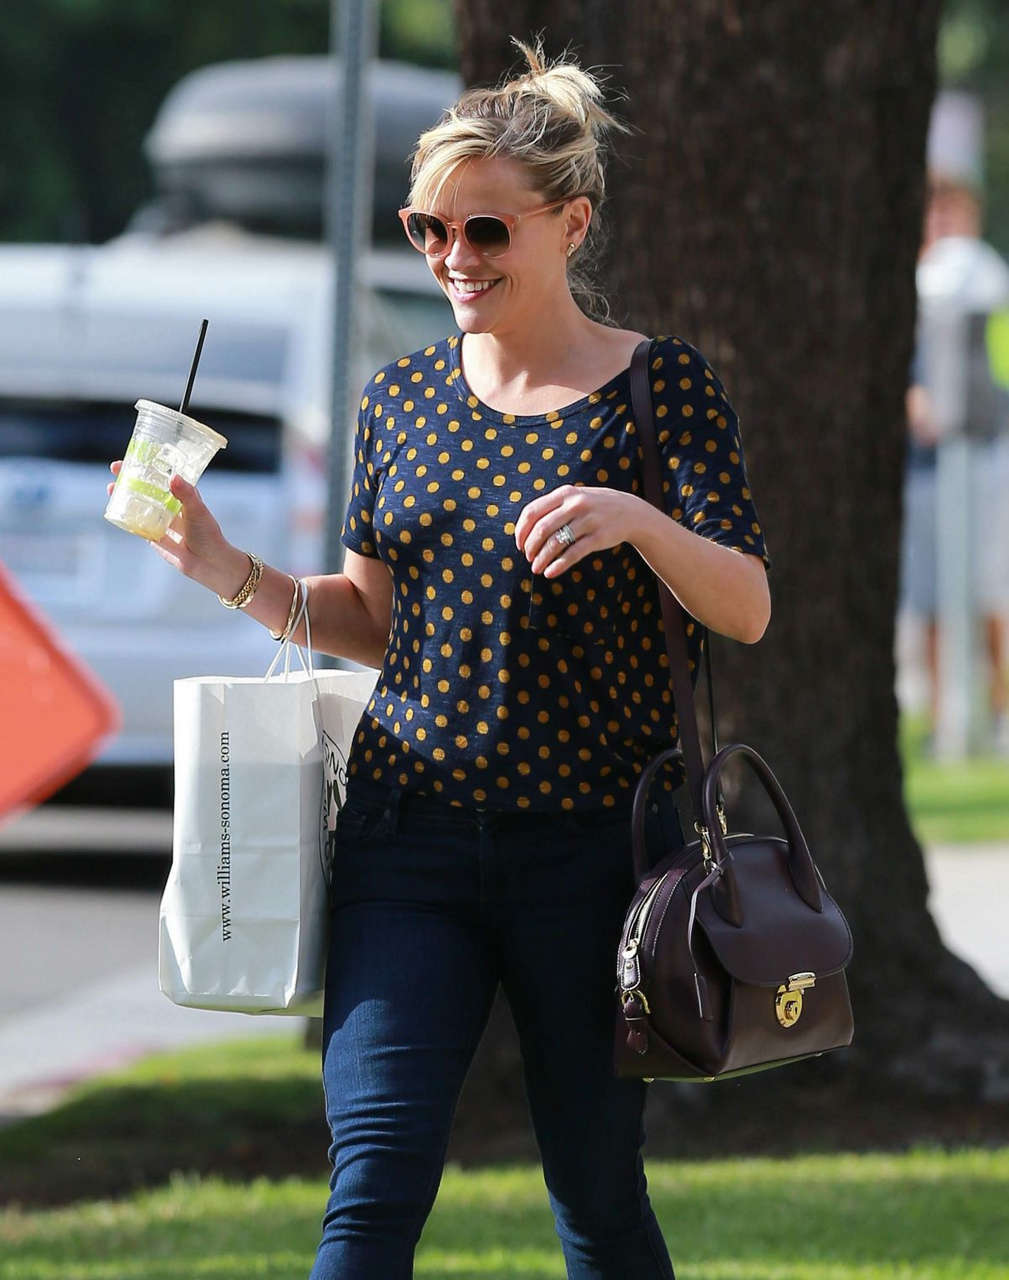 Reese Witherspoon Shopping Bakeware Williams Sonoma